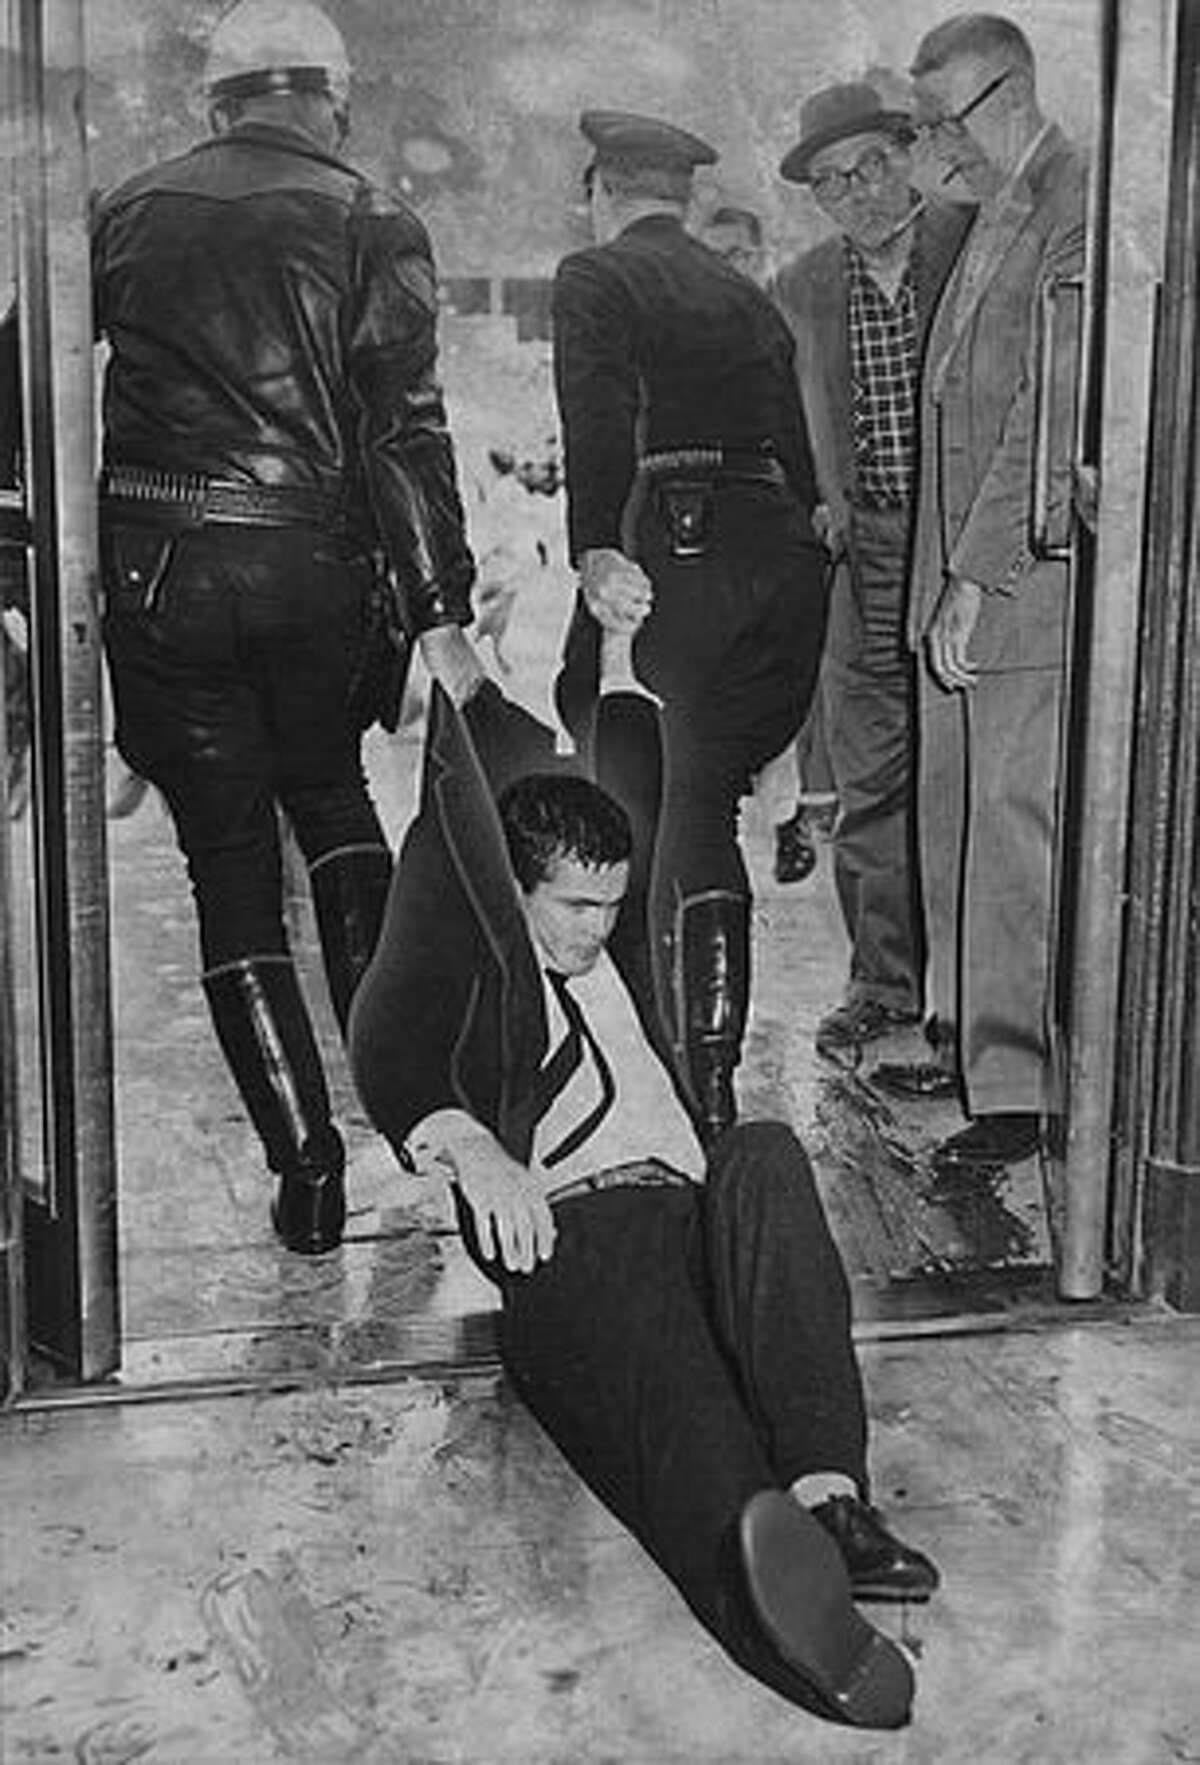 Two police officers drag a protester out of City Hall in San Francisco, one of 64 people hauled off to jail on "Black Friday," May 13, 1960.